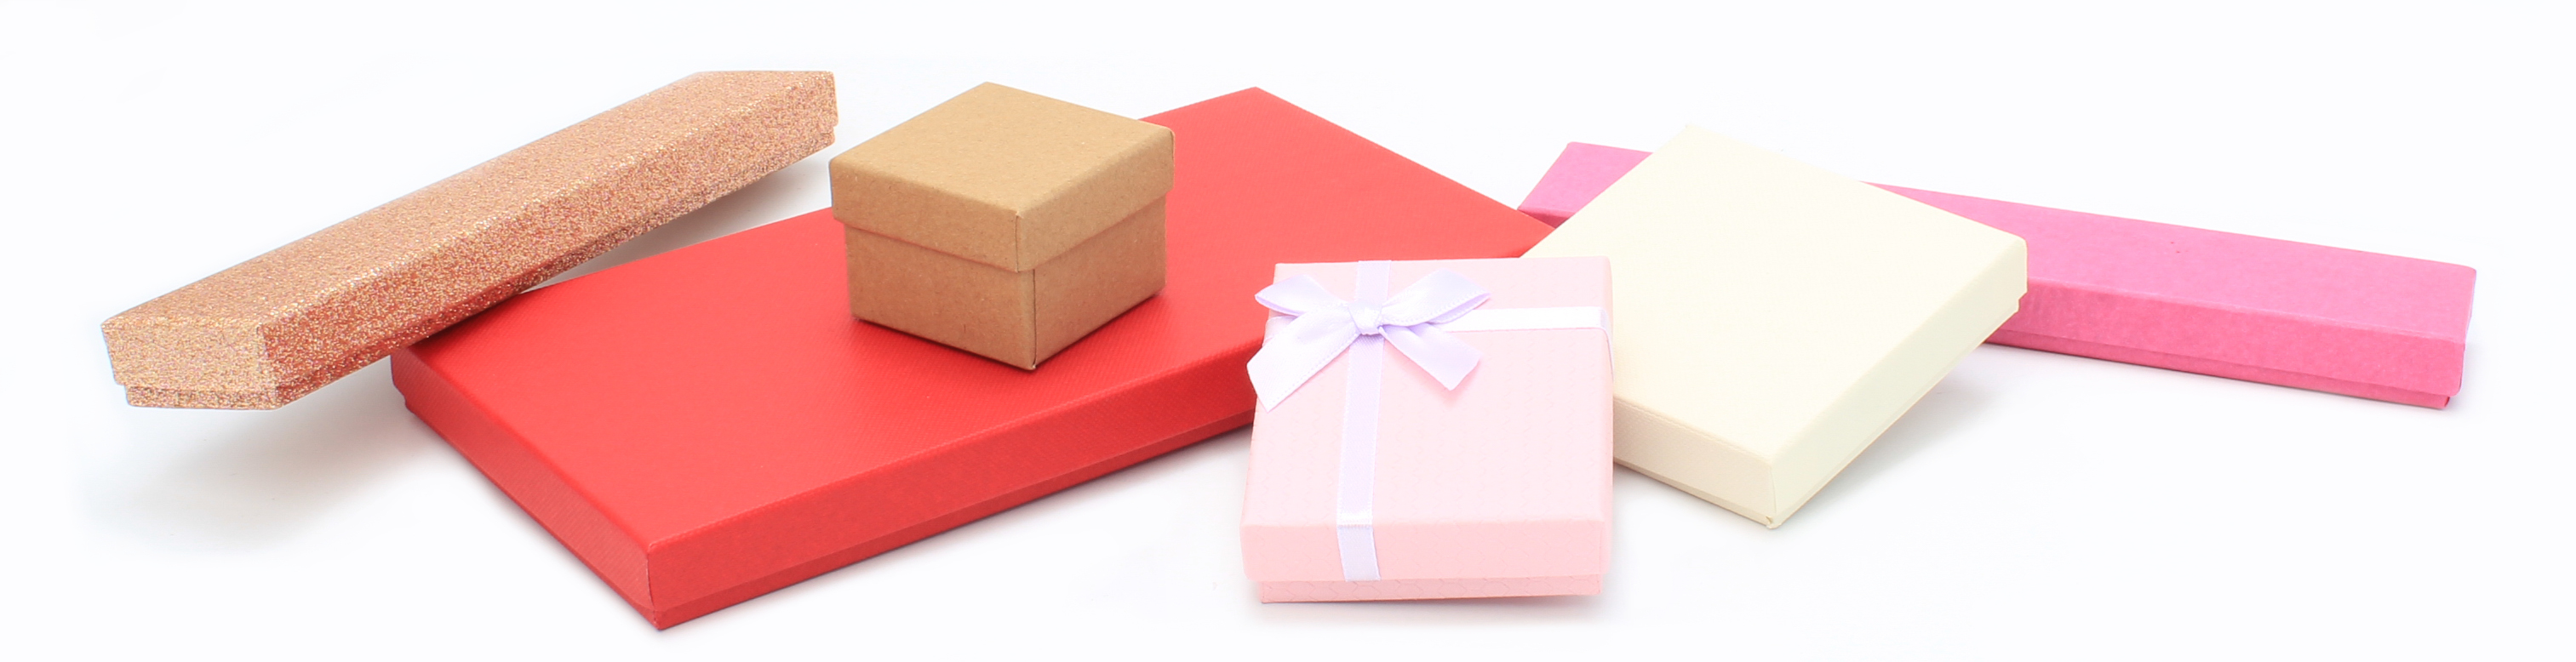 Shop Square Cardboard Paper Jewelry Gift Boxes for Jewelry Making